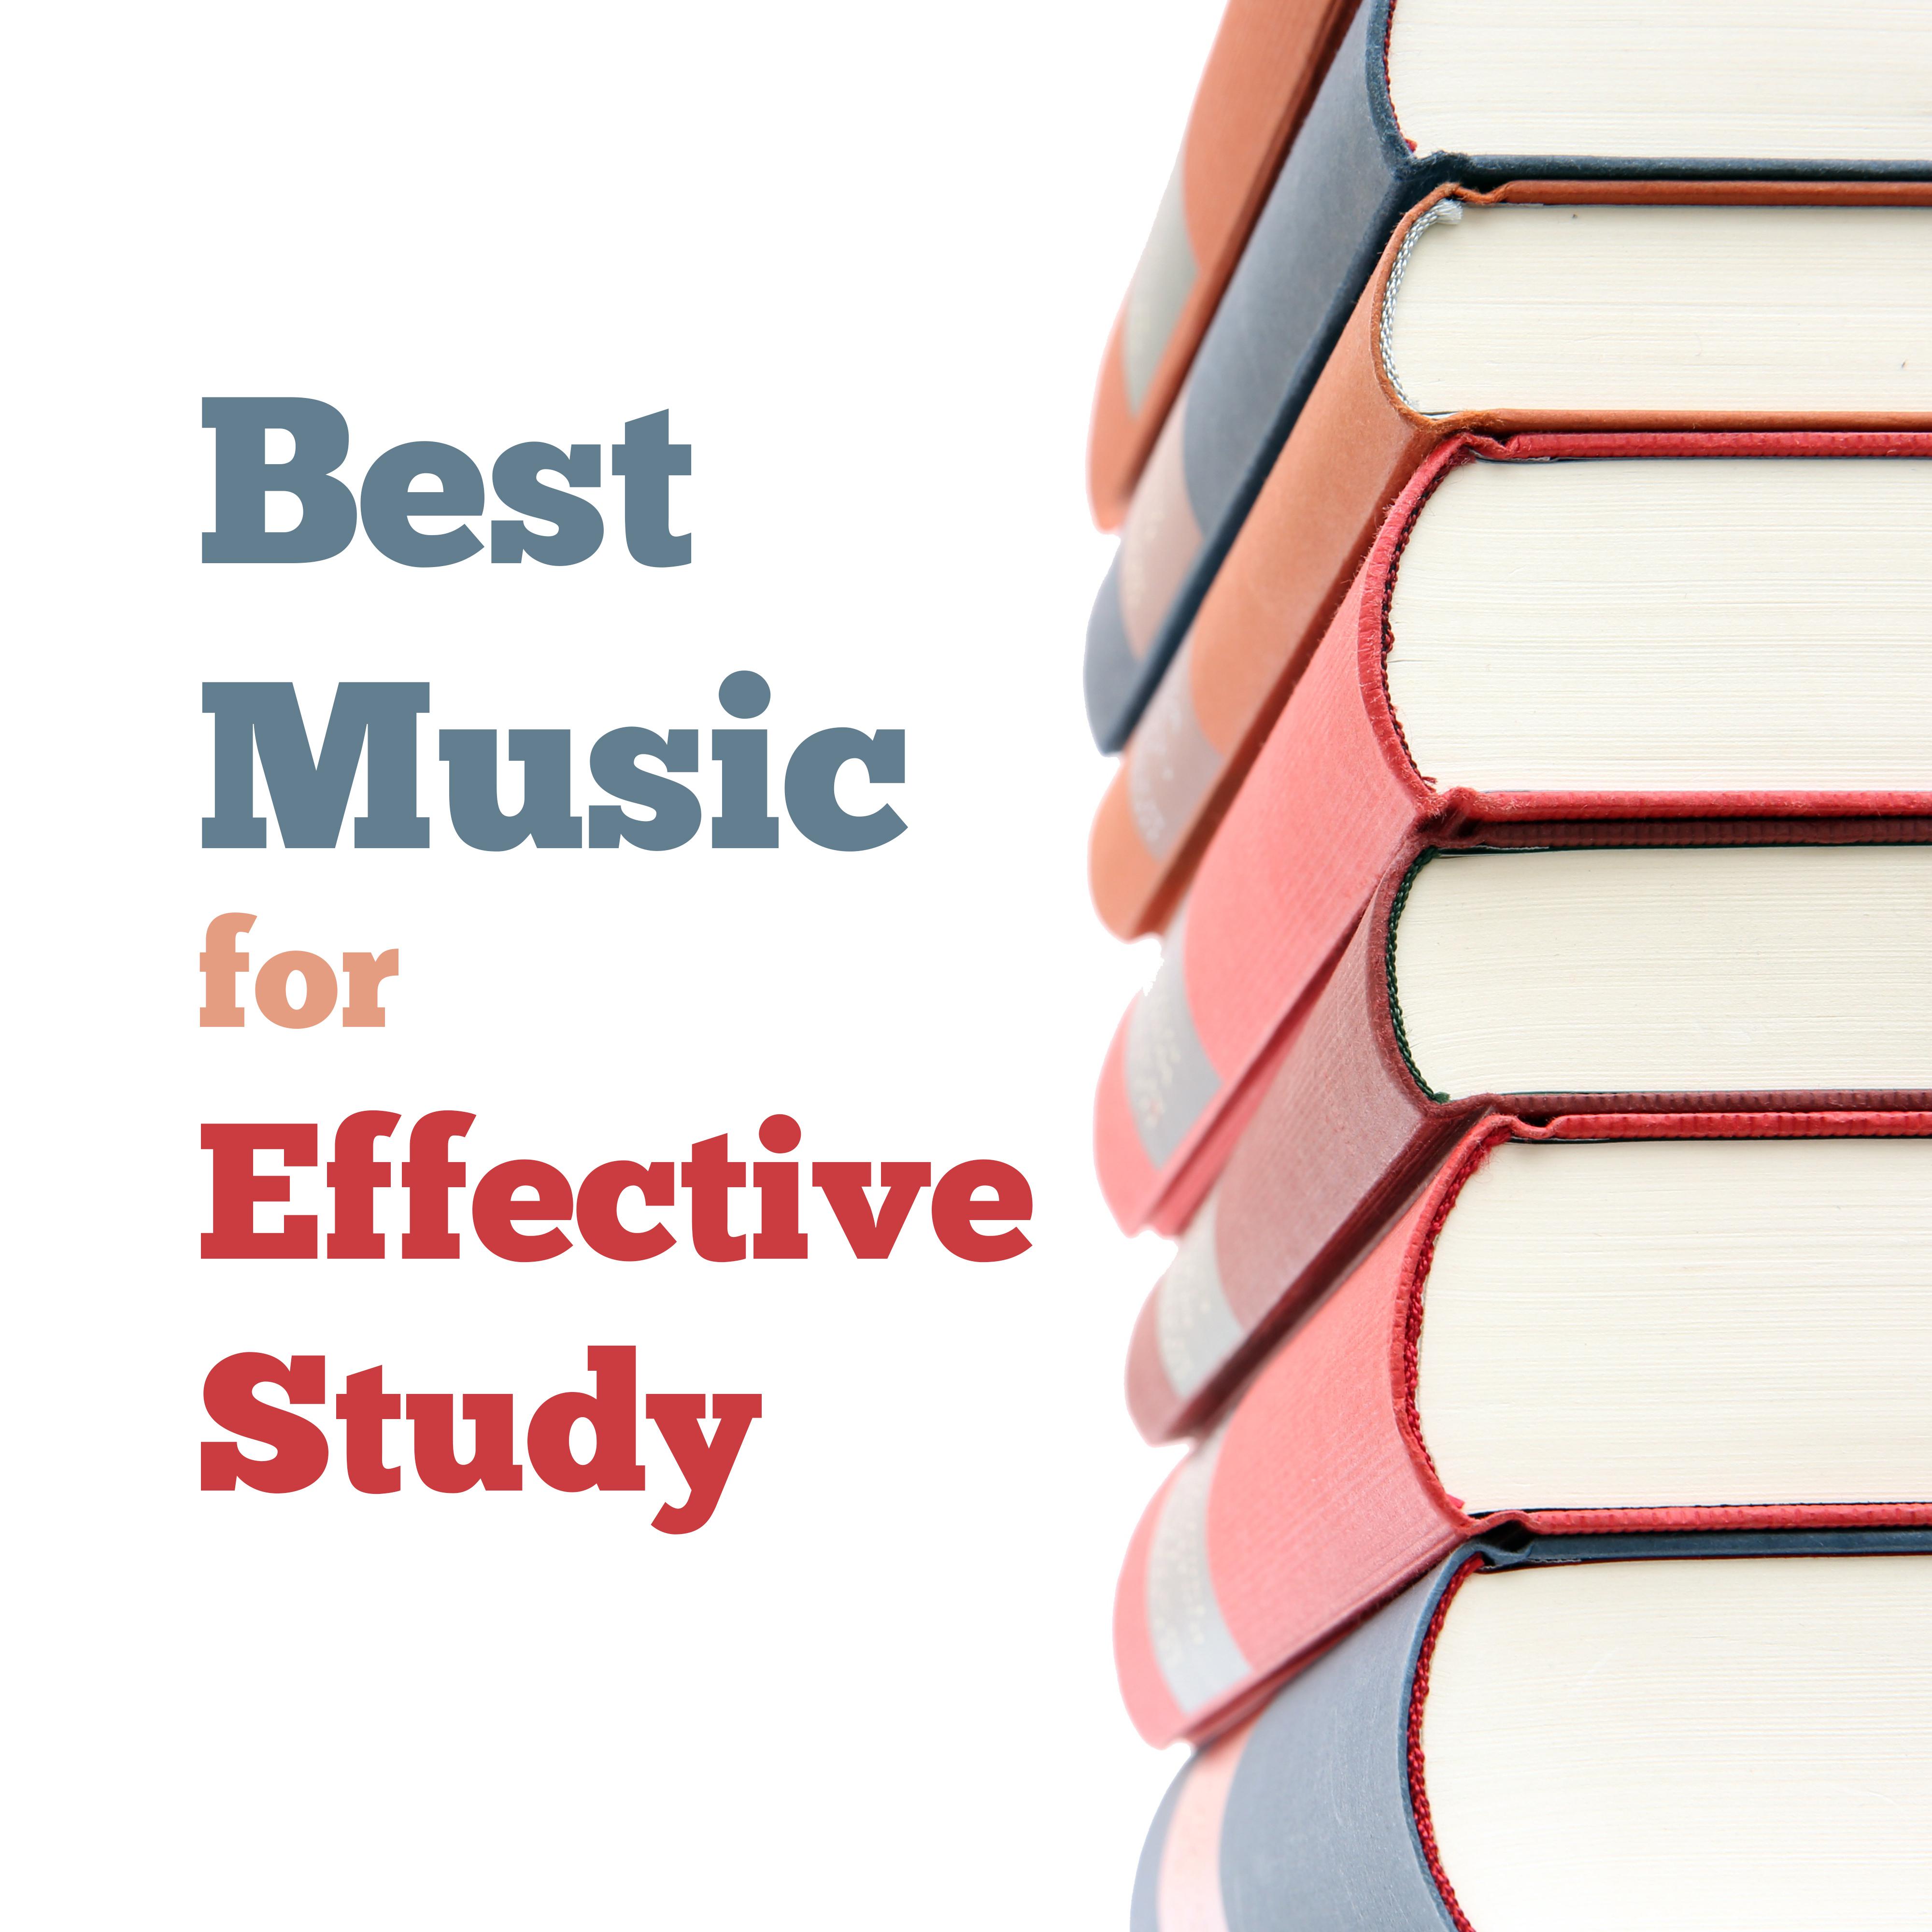 Best Music for Effective Study  Classical Sounds for Learning, Music for Concentration, Focus on Task, Easy Exam, Bach to Work